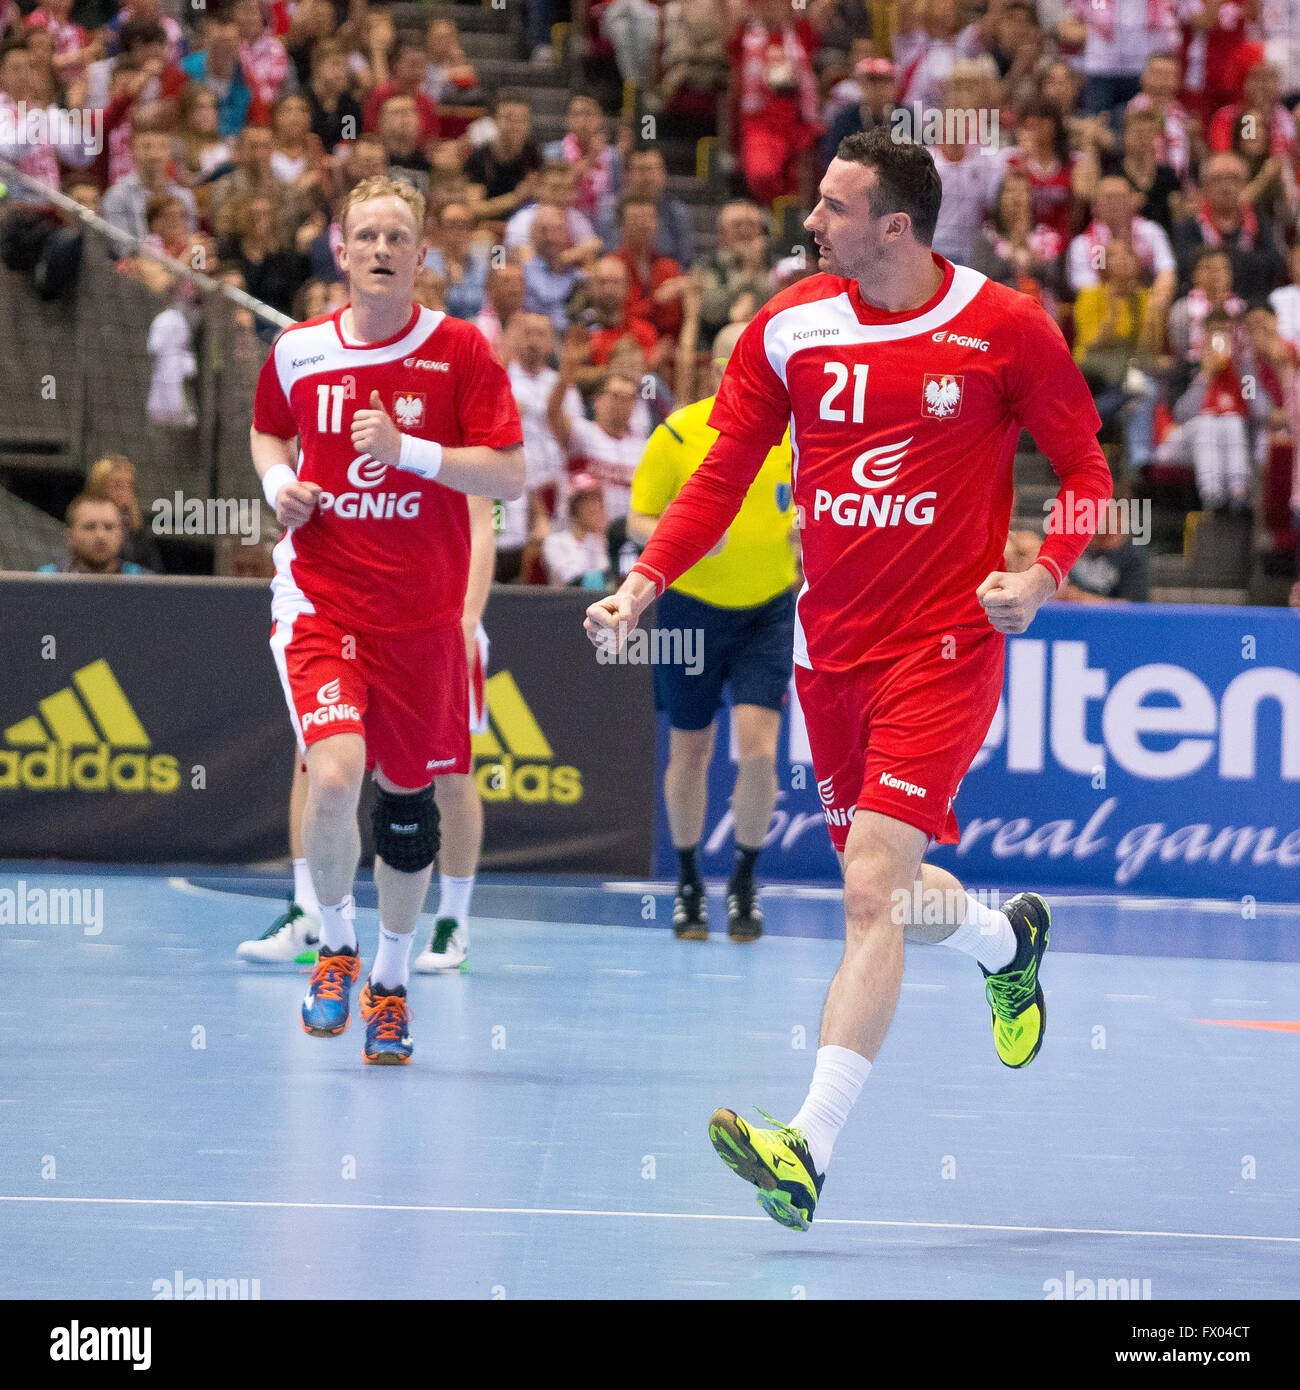 Team Denmark during the IHF Women's World Championship 2021, Third place  final handball match between Denmark and Spain on December 19, 2021 at  Palau d'Esports de Granollers in Granollers, Barcelona, Spain. Photo